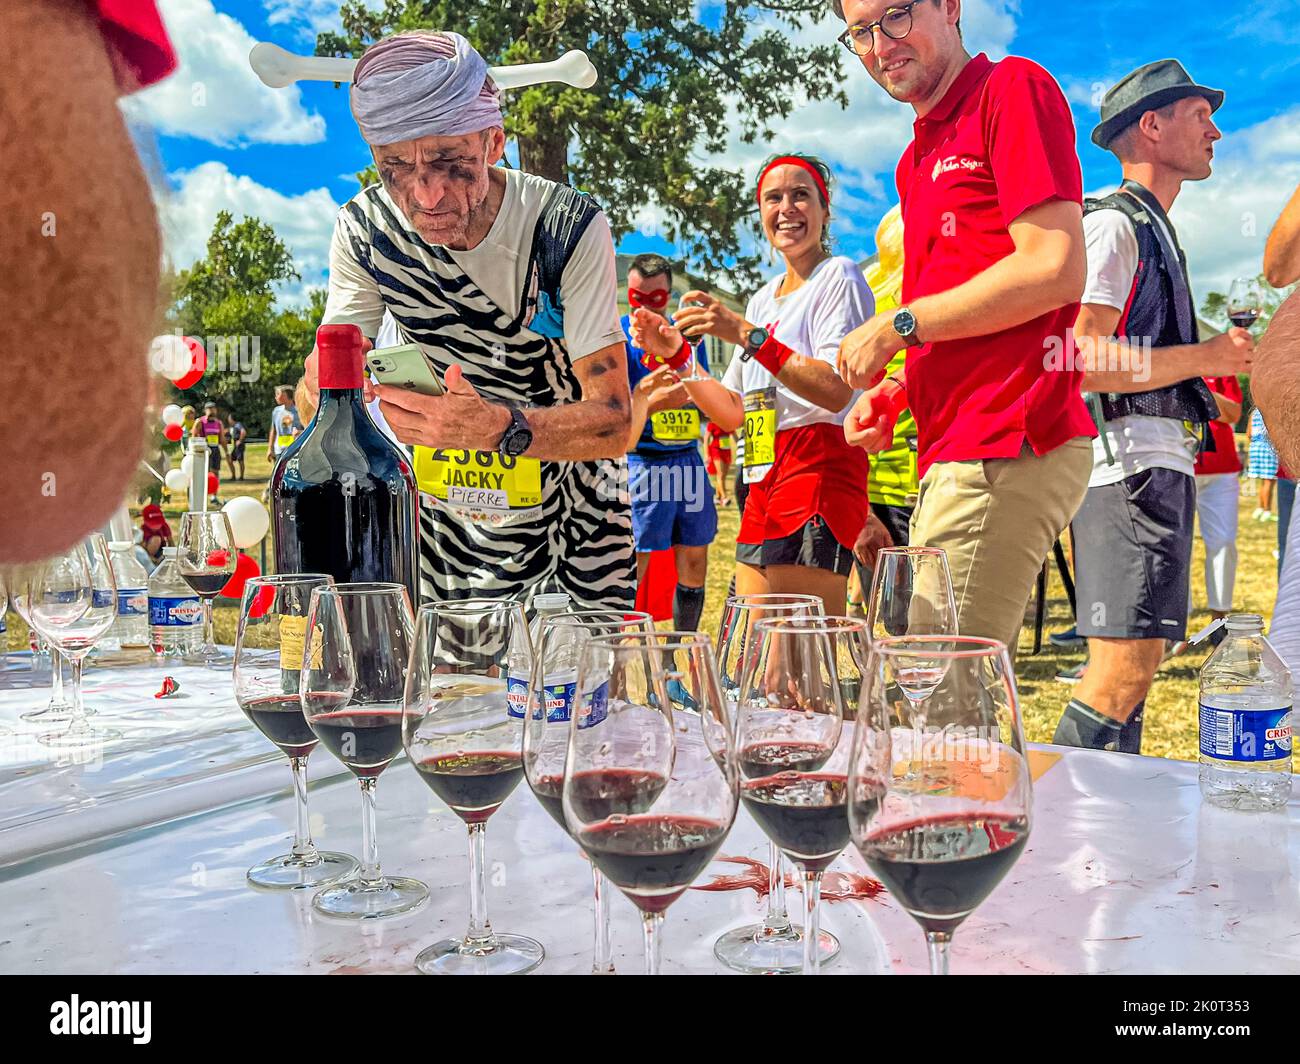 Things are done in style at Chateau Phelan Segur. Here, participants in the 36th Marathon des Chateaux du Medoc are served red wine in glasses. Even on the run one takes the time to capture the labels of the poured Grand Crus Stock Photo